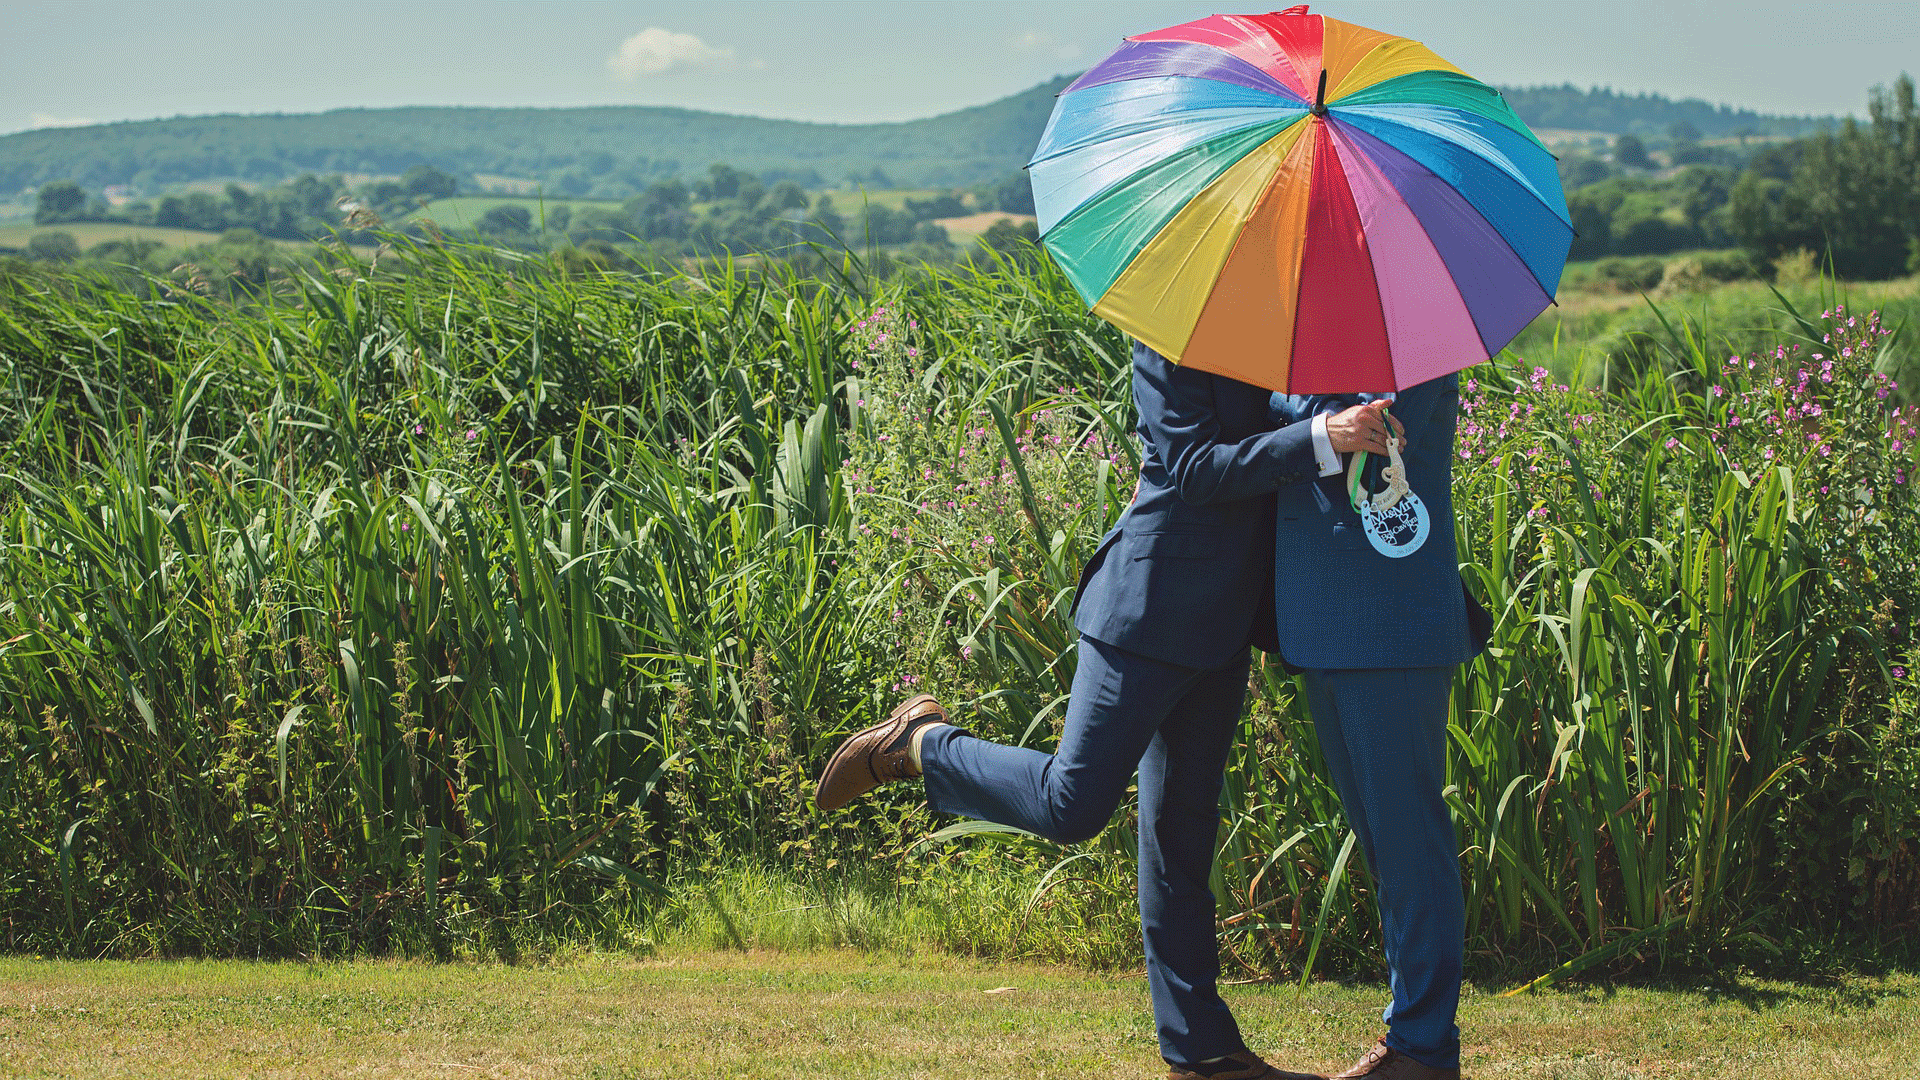 Queer love: Two men standing under a rainbow umbrella in front of a field